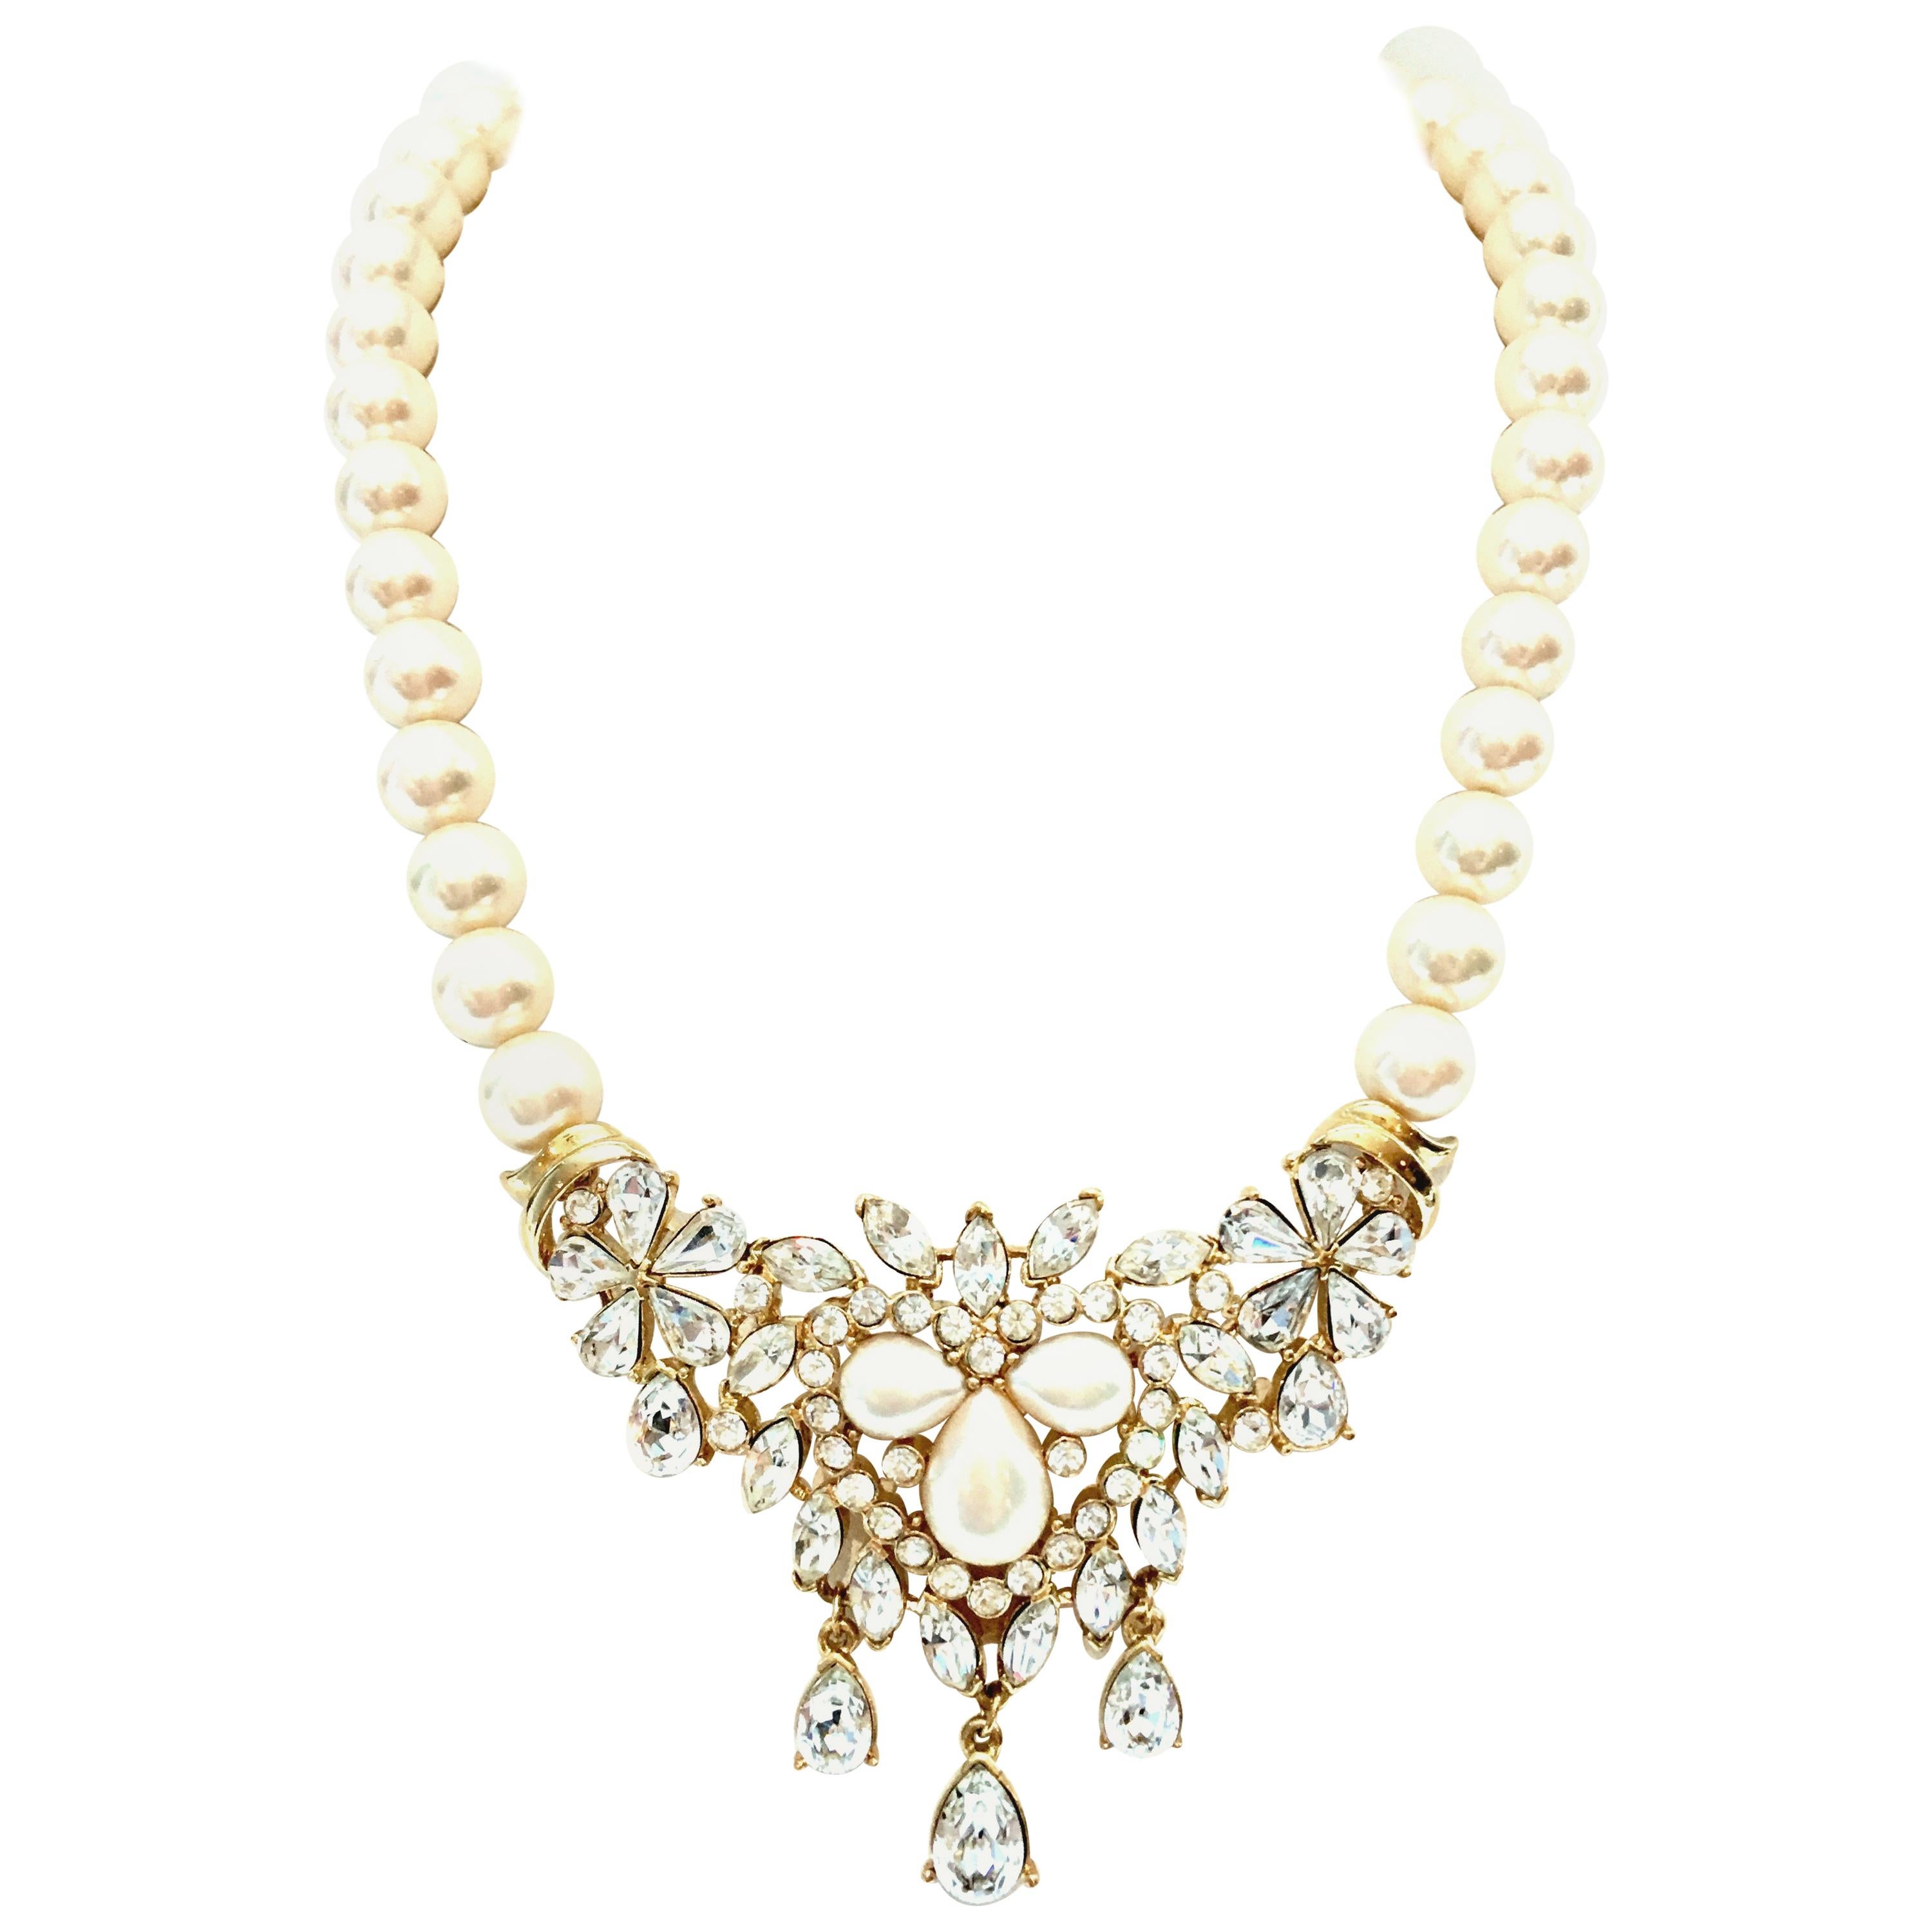 20th Century Gold Austrian Crystal & Pearl Necklace By Matsumoto For Trifari